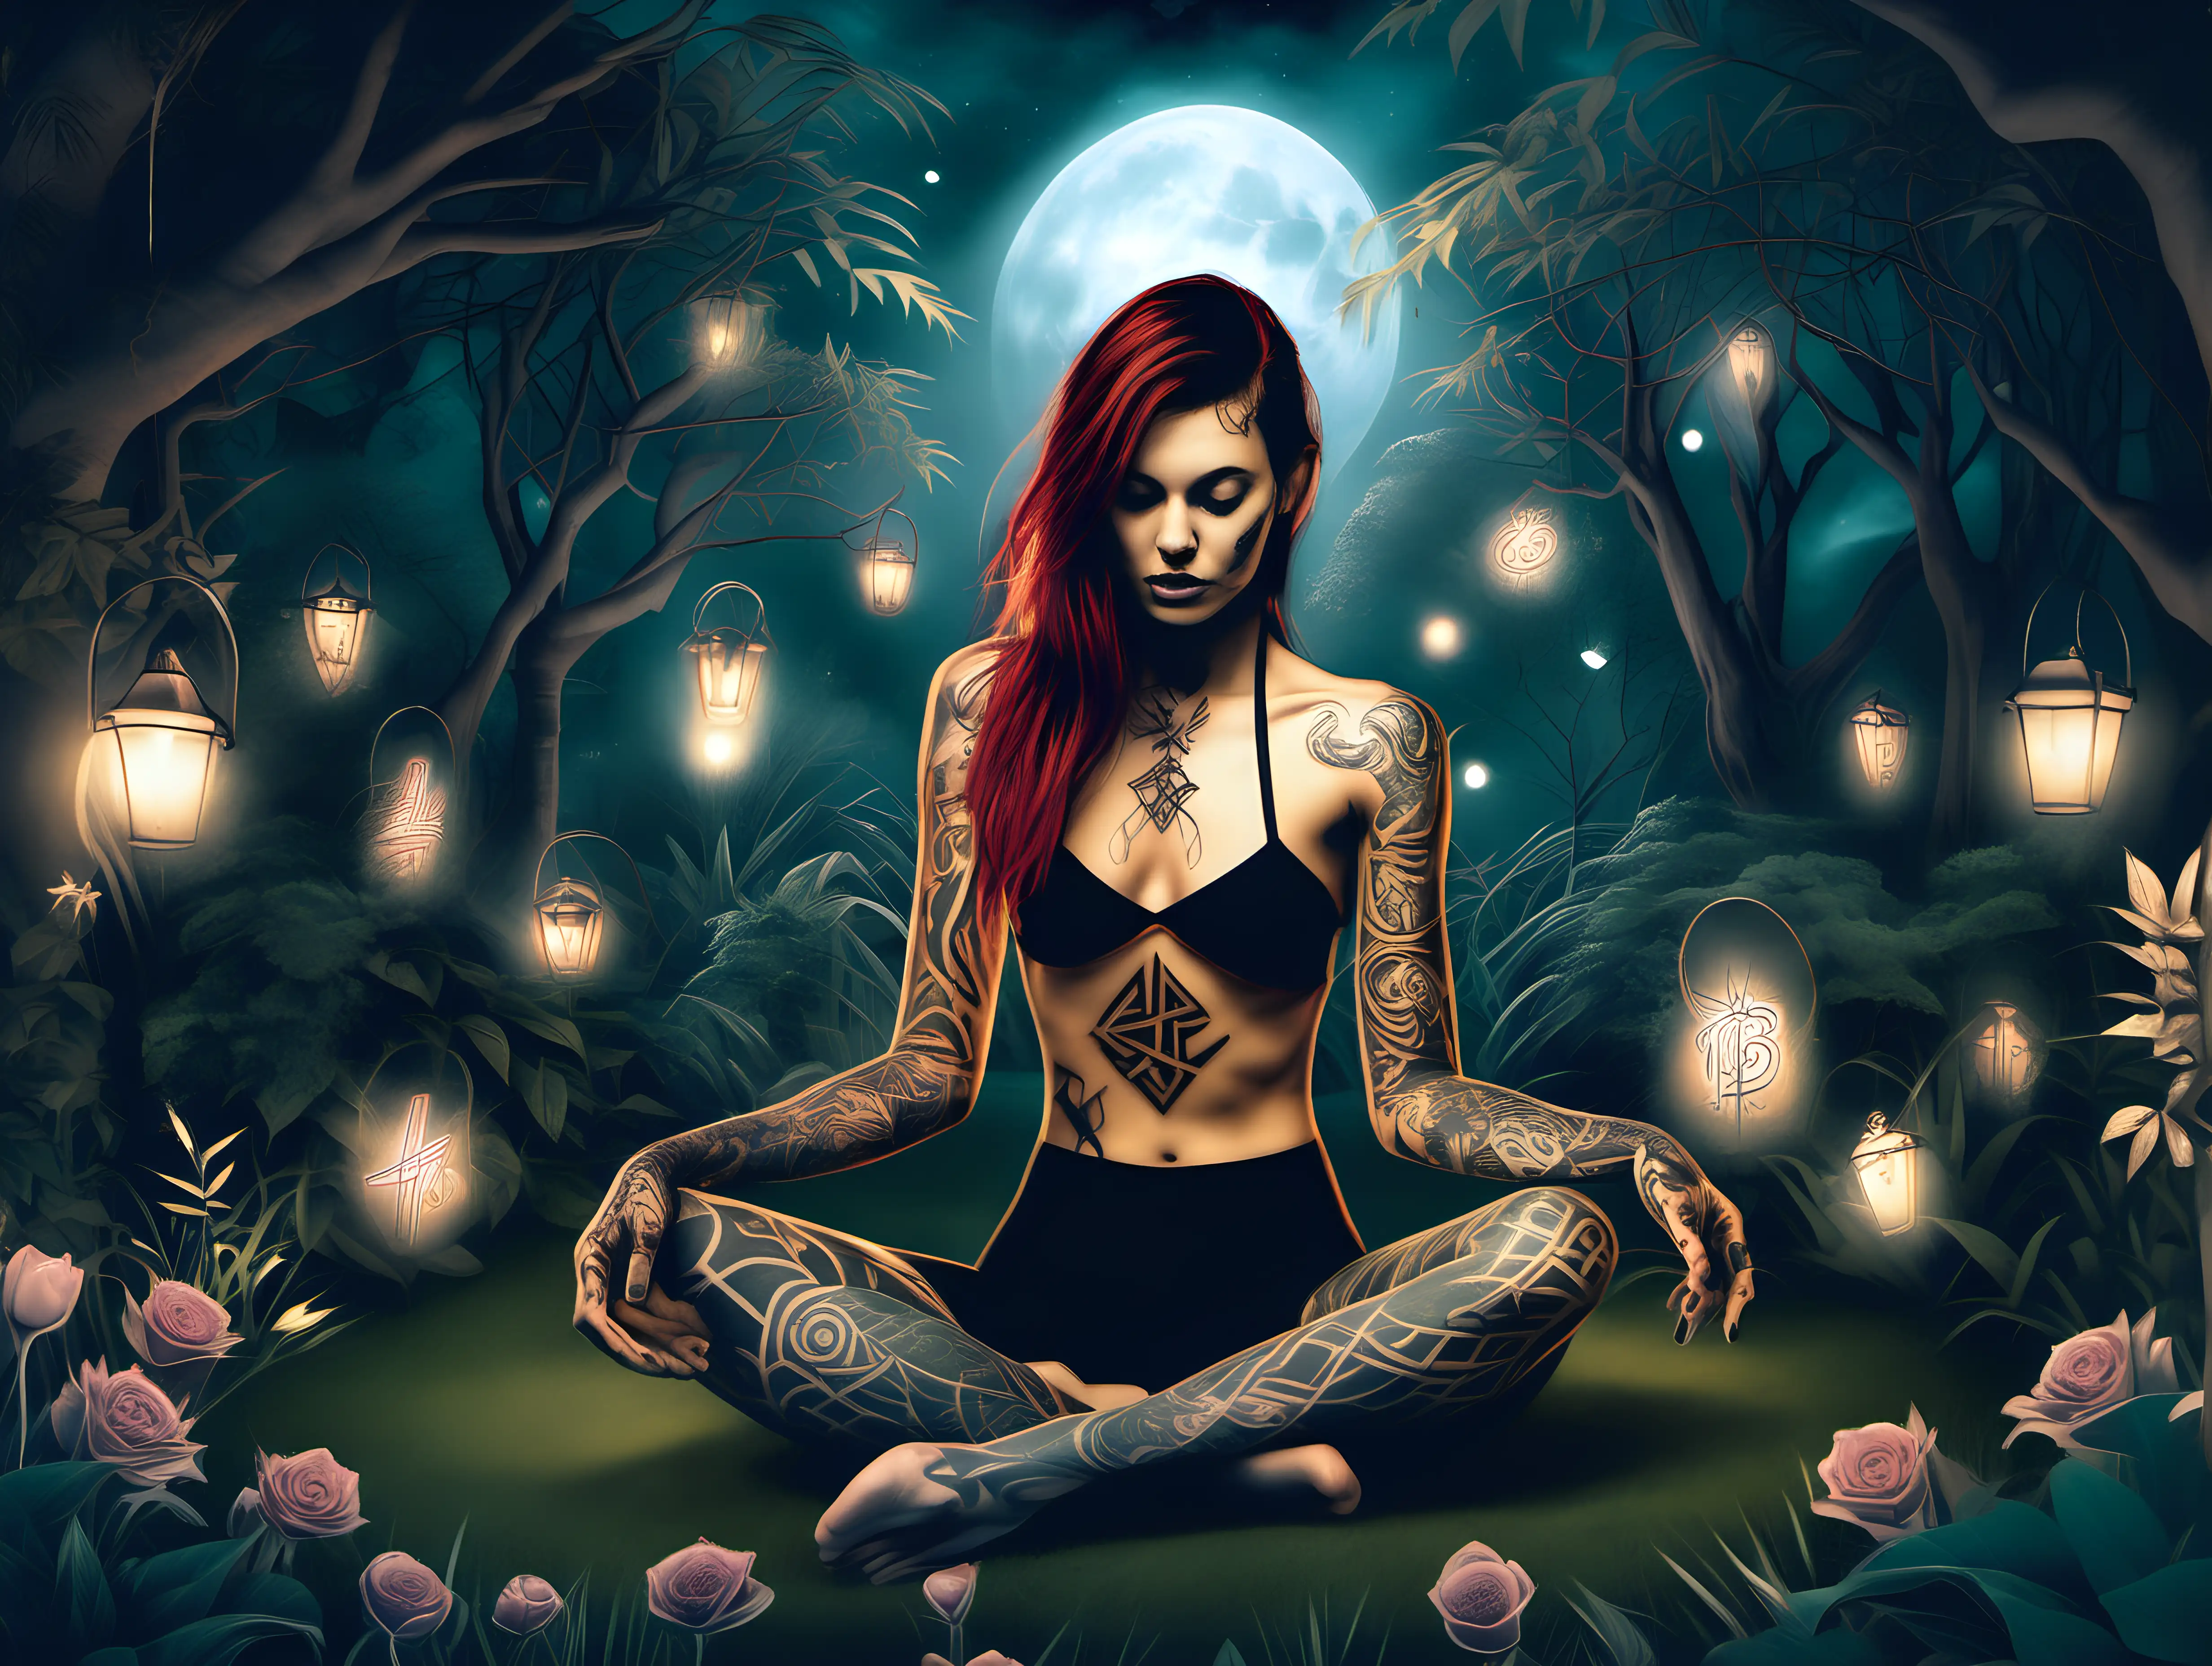 image of a female human with draconic runes tattooed on arms and body, sitting in a beautiful garden lit up by the moonlight